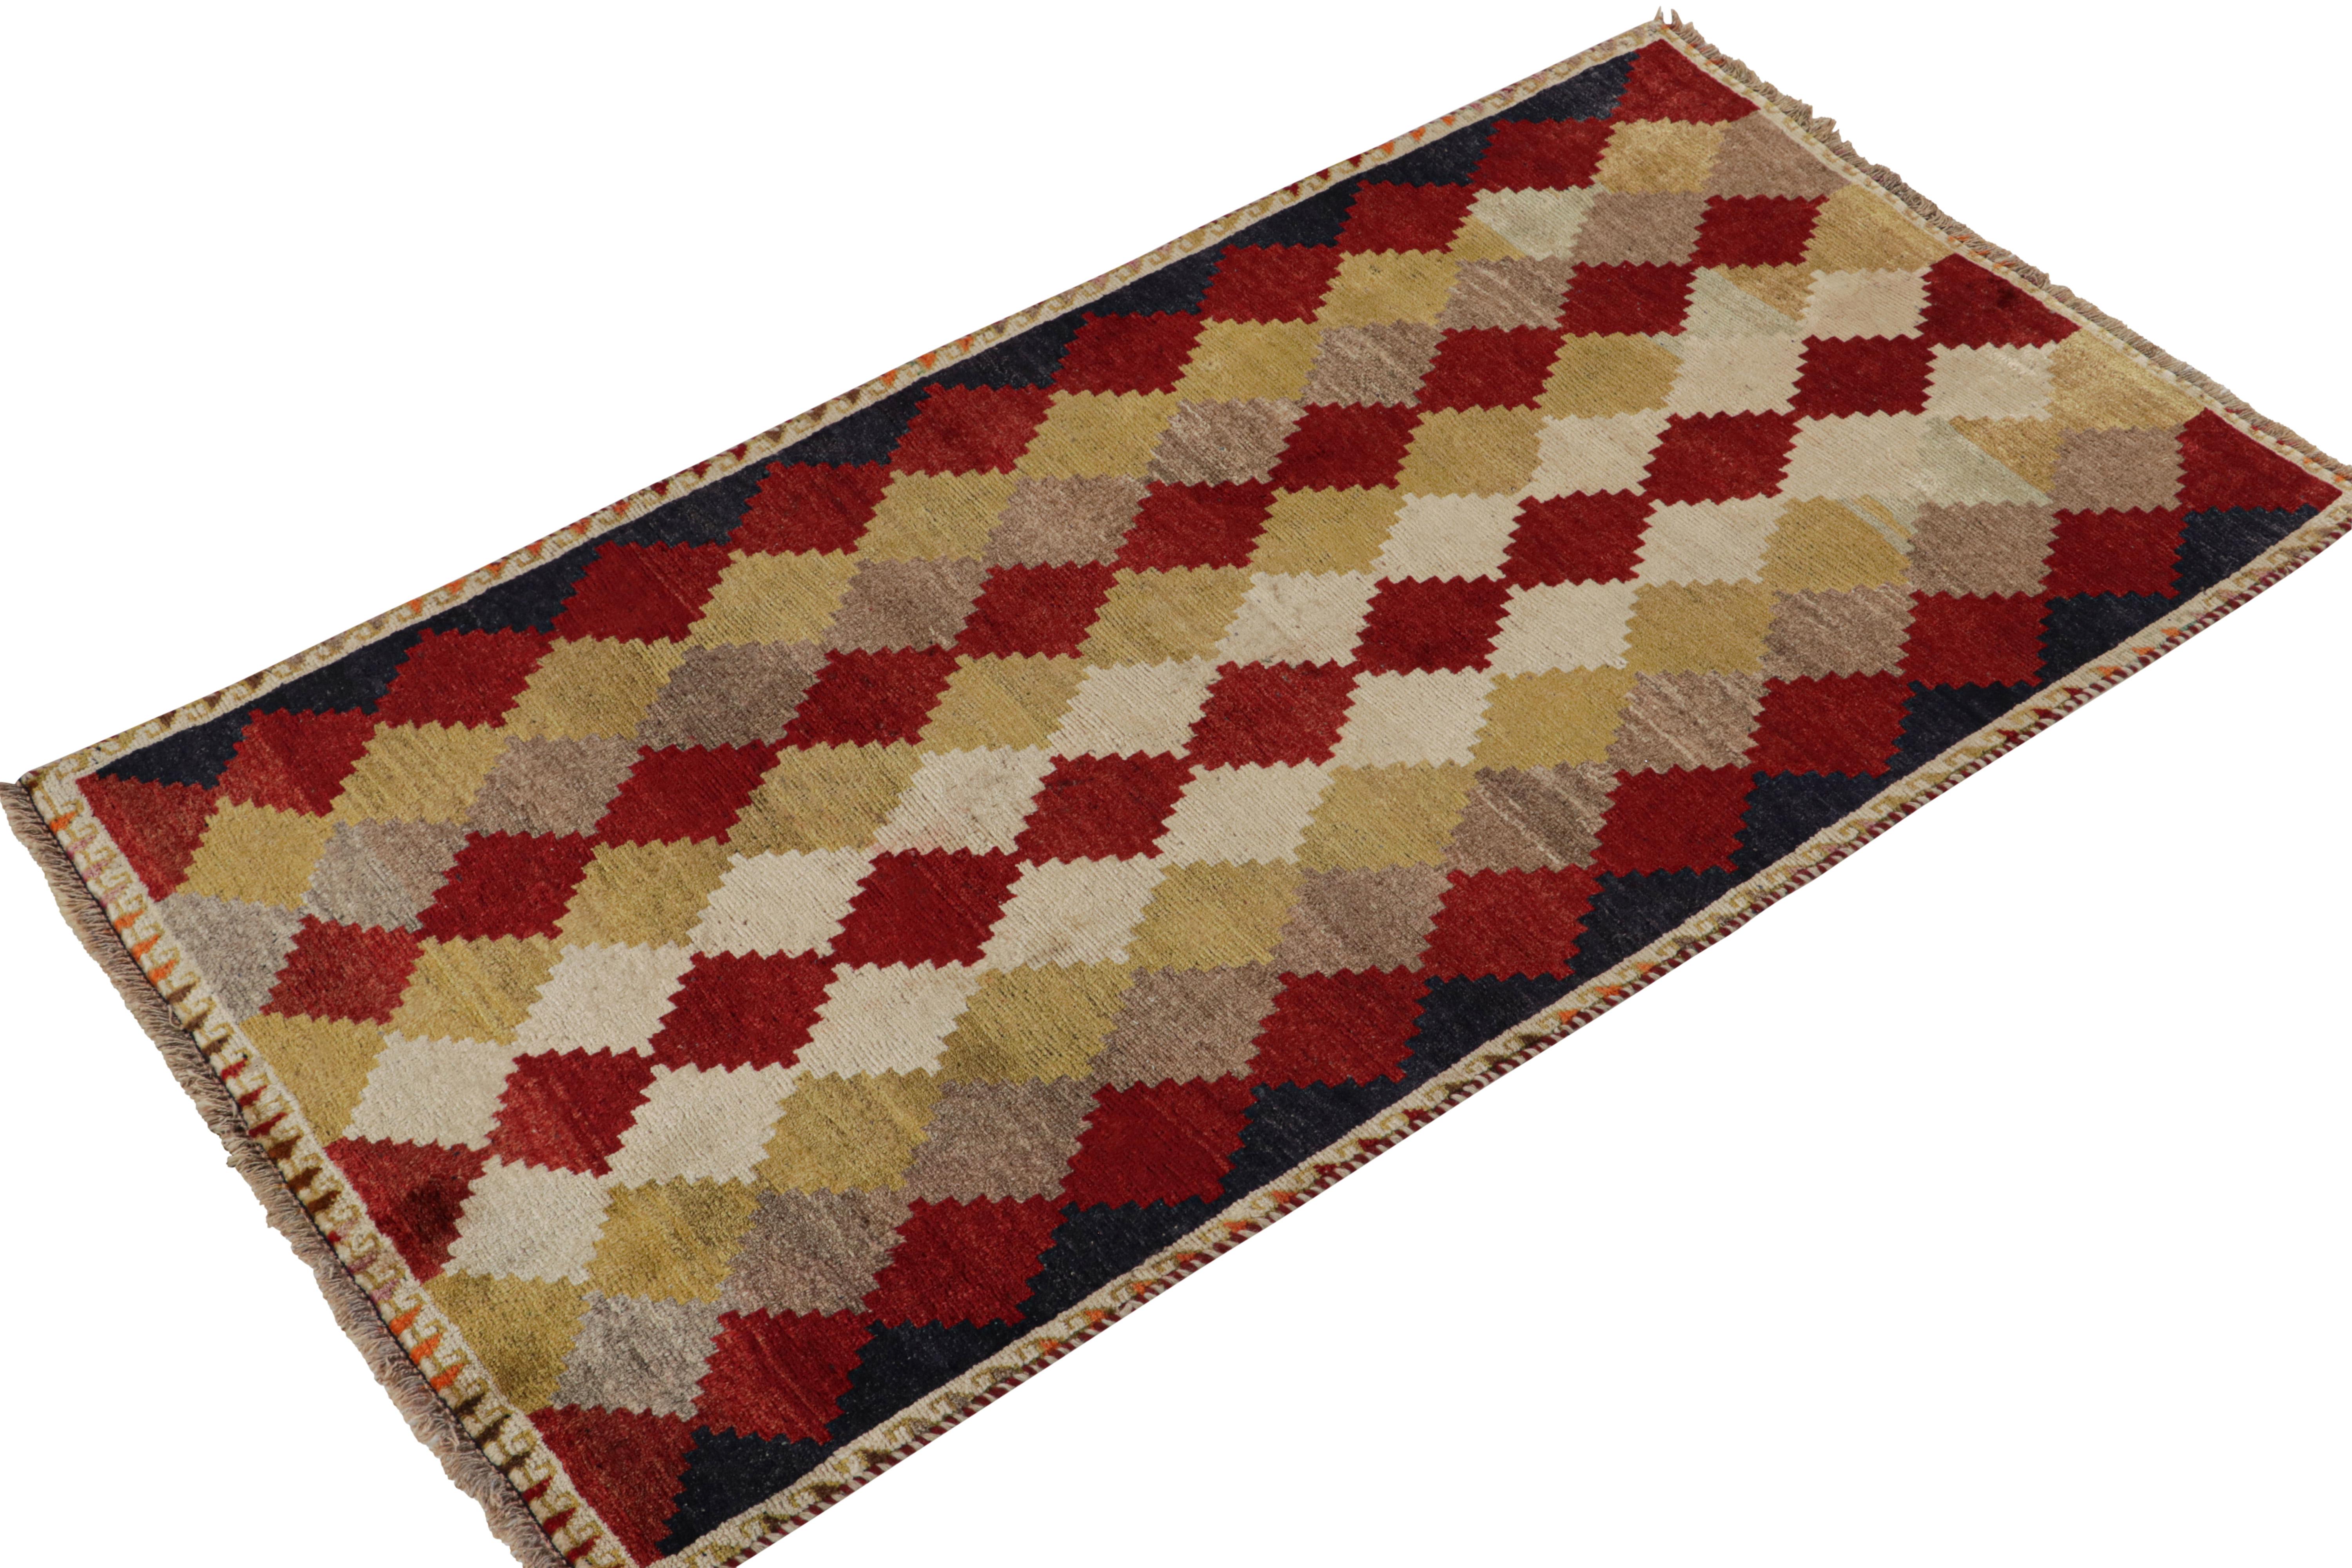 This vintage 3x6 Gabbeh Persian rug is from the latest entries in Rug & Kilim’s rare tribal curations. Hand-knotted in wool circa 1950-1960.

On the Design:

This tribal provenance is one of the most primitive, and collectible shabby-chic styles